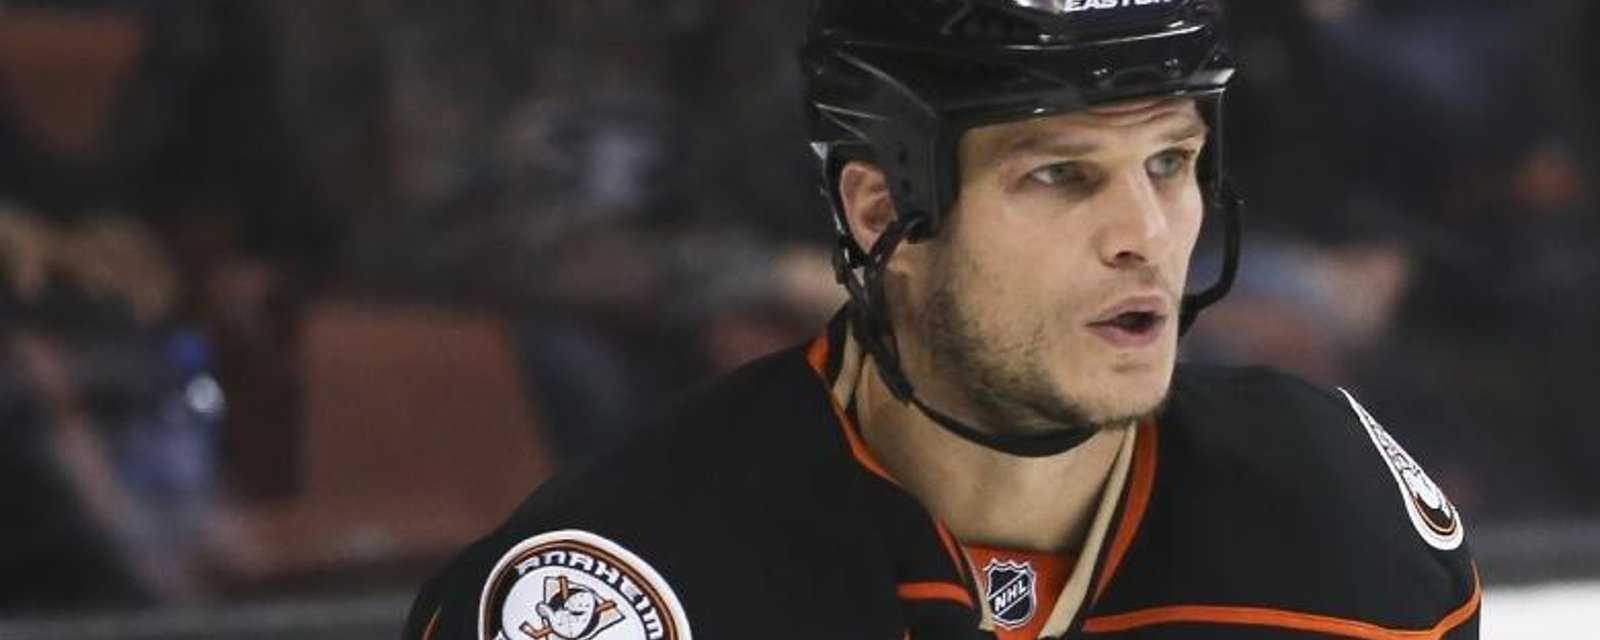 Canucks pay tribute to Kevin Bieksa in his return to Vancouver.